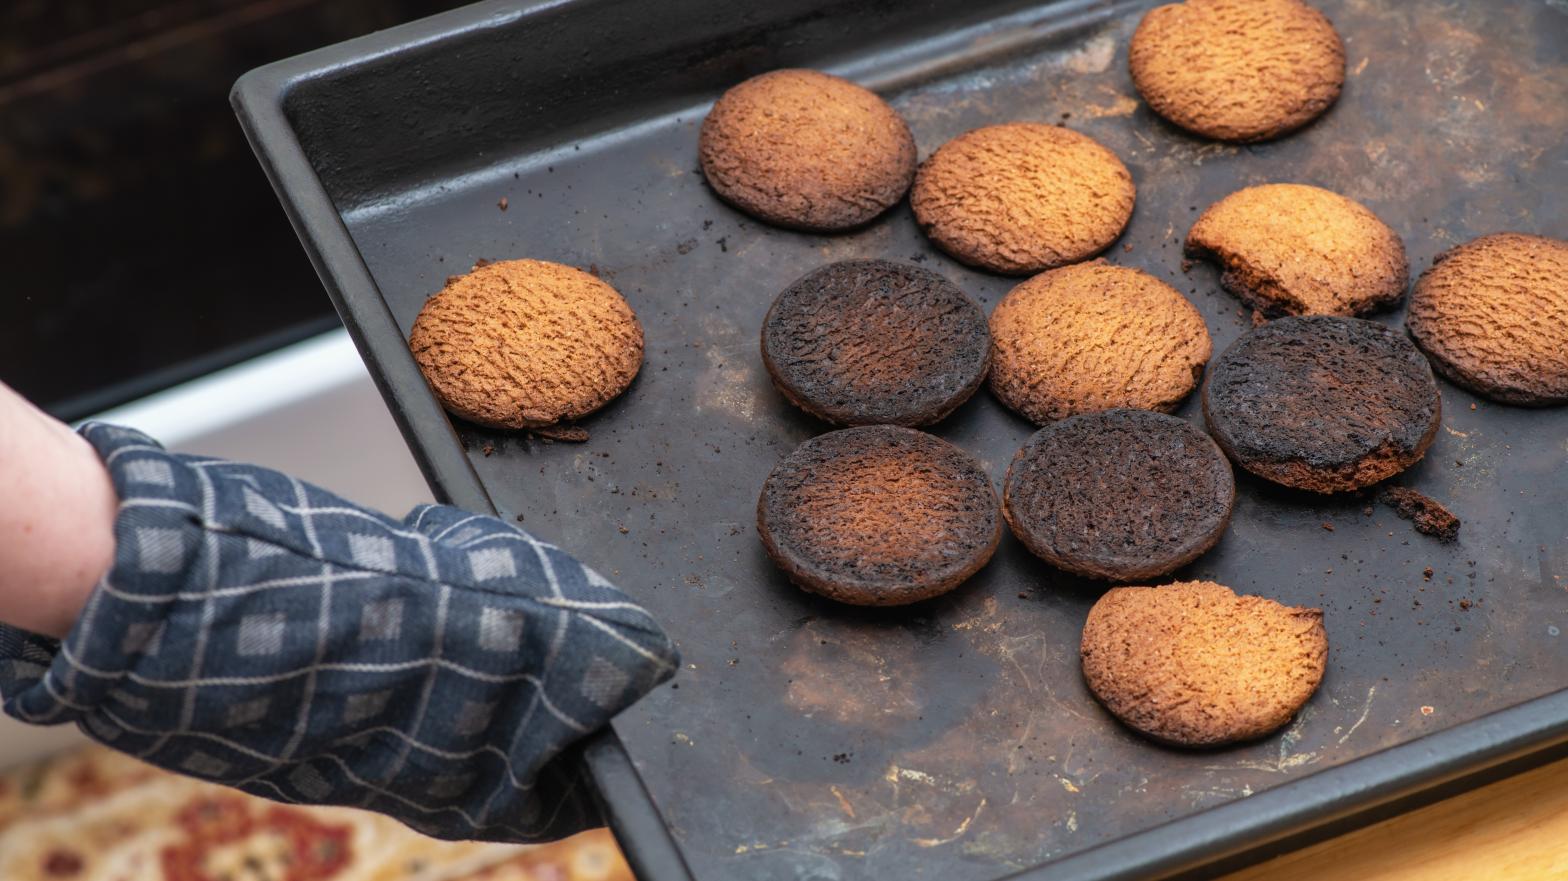 Two Tricks to Keep Baked Goods From Burning